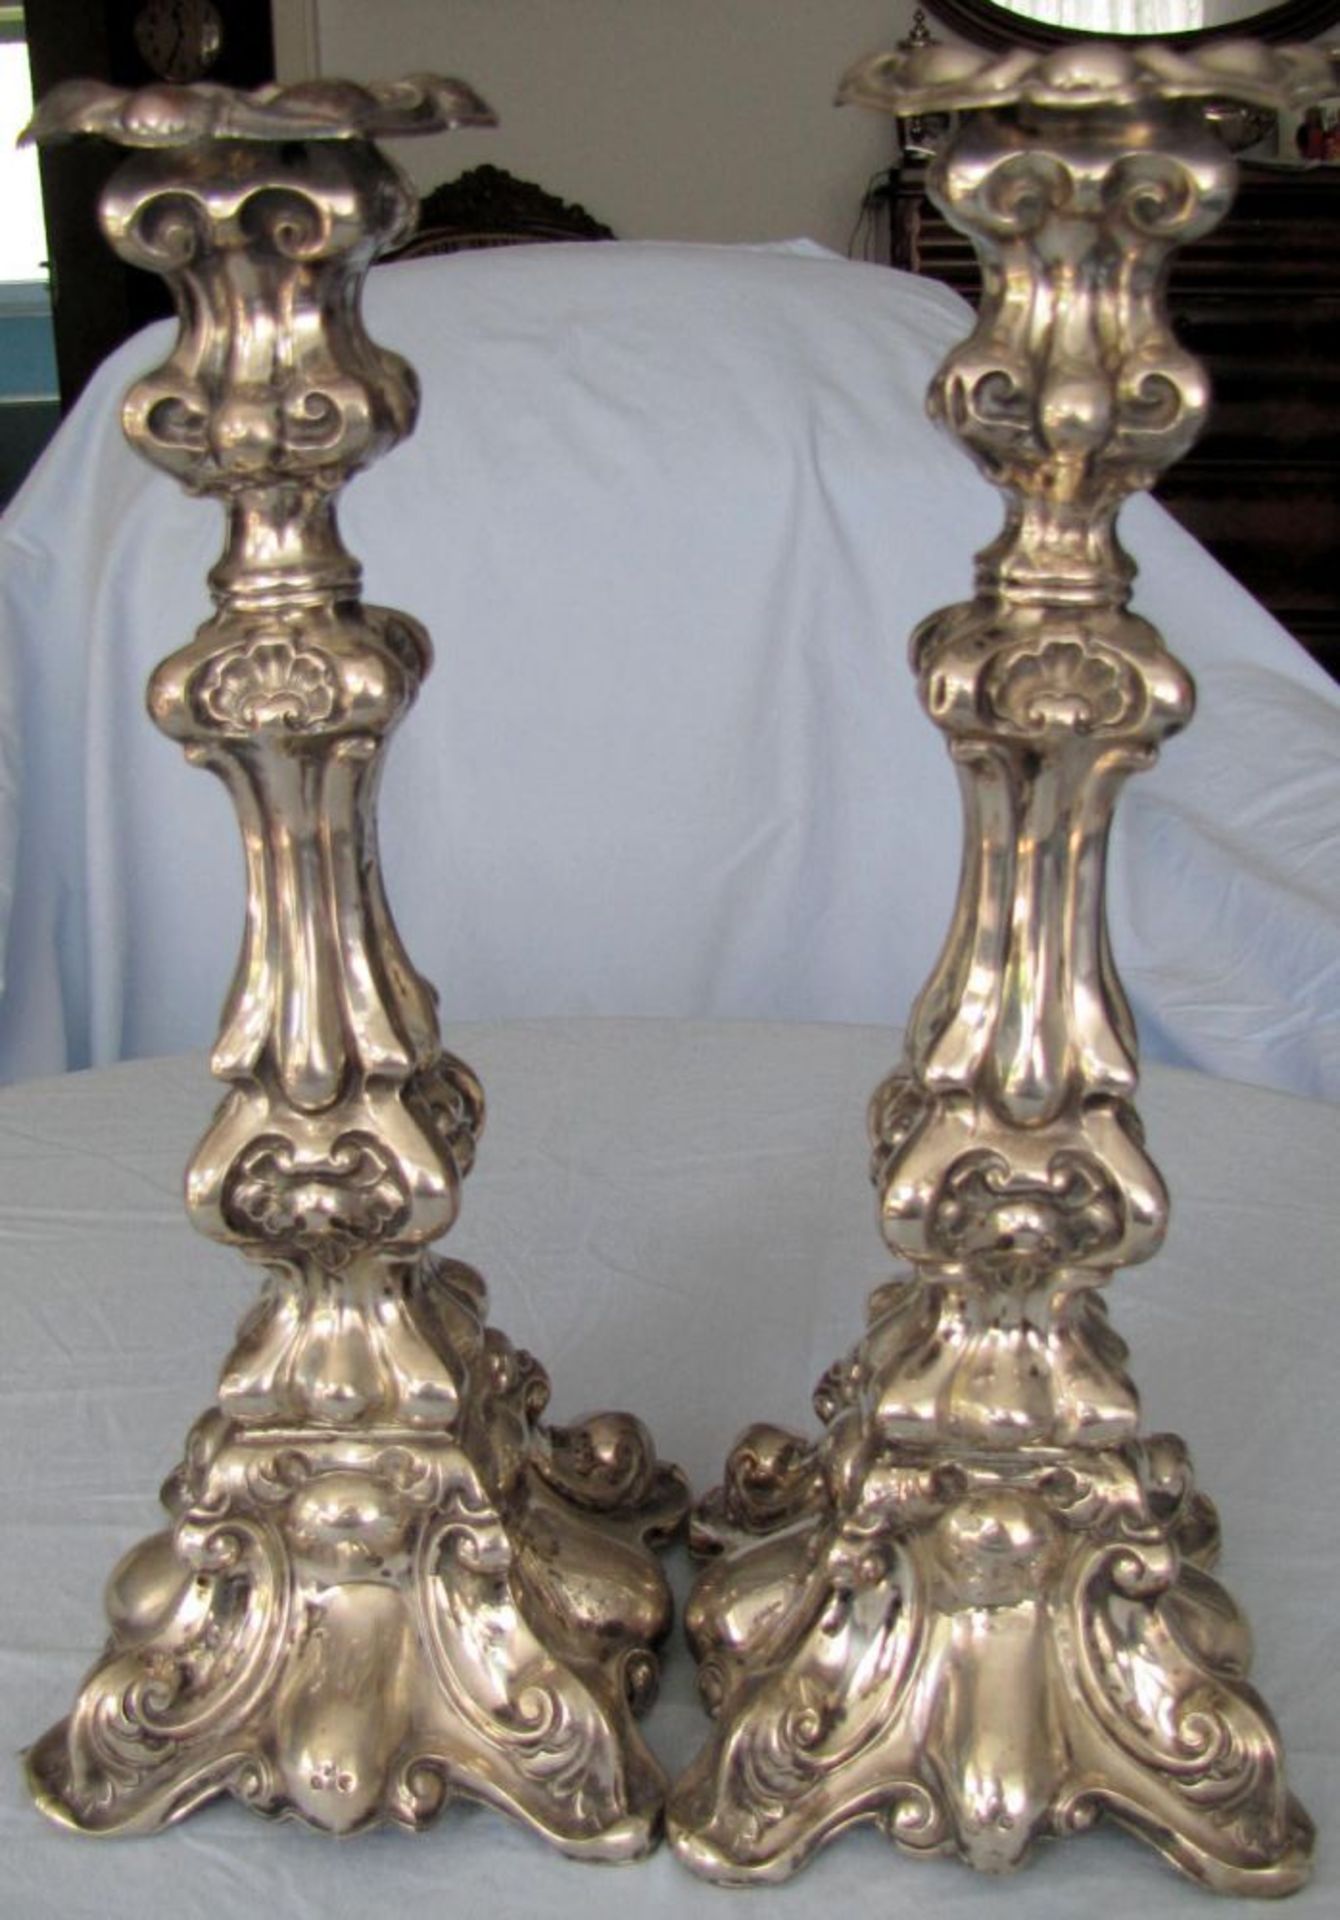 Pair of Silver Candlesticks, Proably 19th Century or earlier.  427 grams + 552 grams = 979 grams